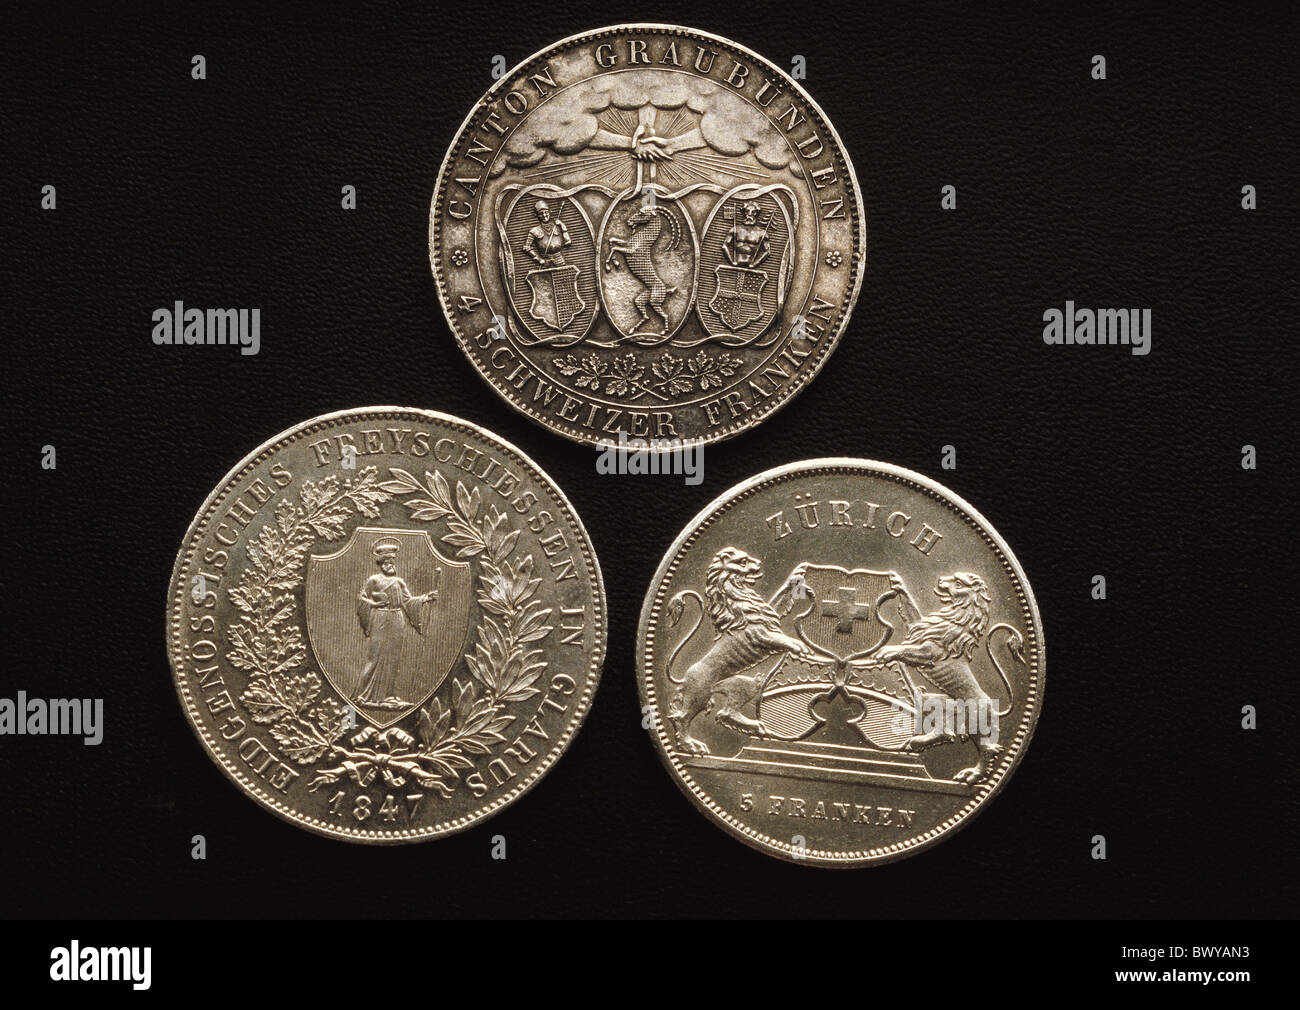 trade commerce antiques classical art old coins Switzerland Europe Schaffhausen Schwyz in federal archive Stock Photo